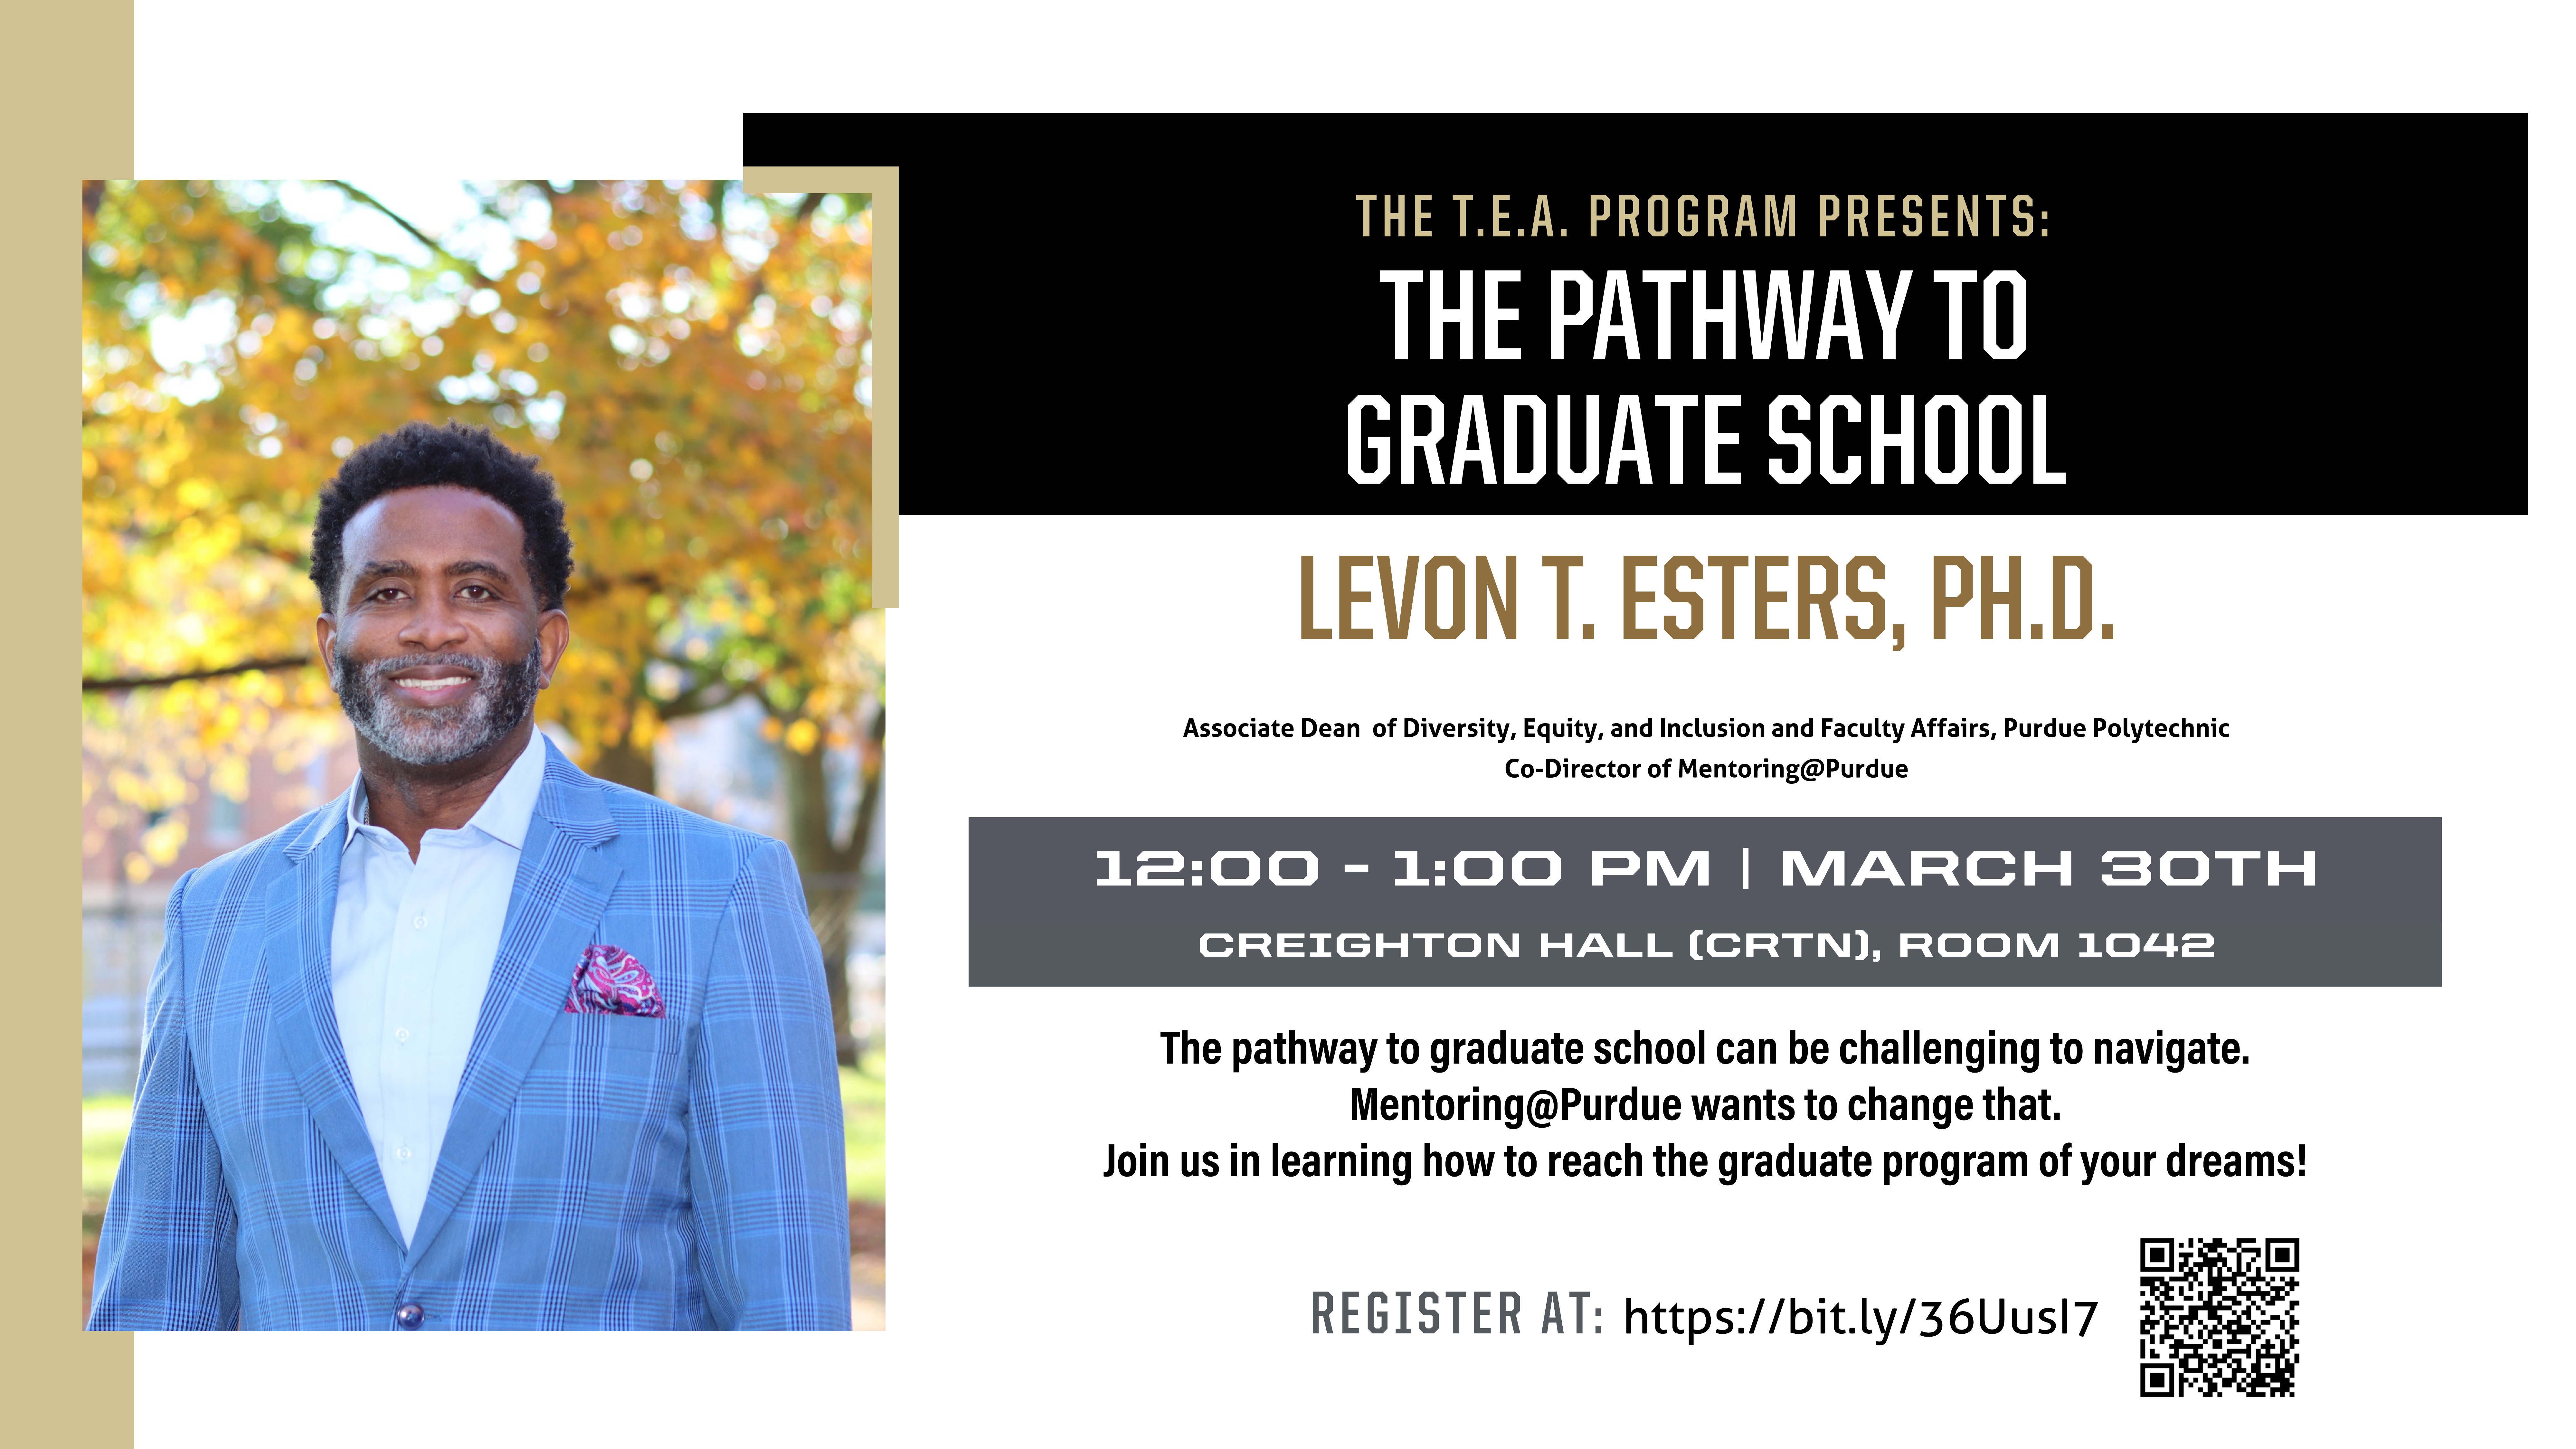 Flyer for the event. Featuring a picture of the presenter, Levon Esters, smiling on the left. The event description reading "The pathway to graduate school can be challenging. Mentoring at Purdue wants to change that. Join us in learning hwo to reach the graduate program of your dreams!"